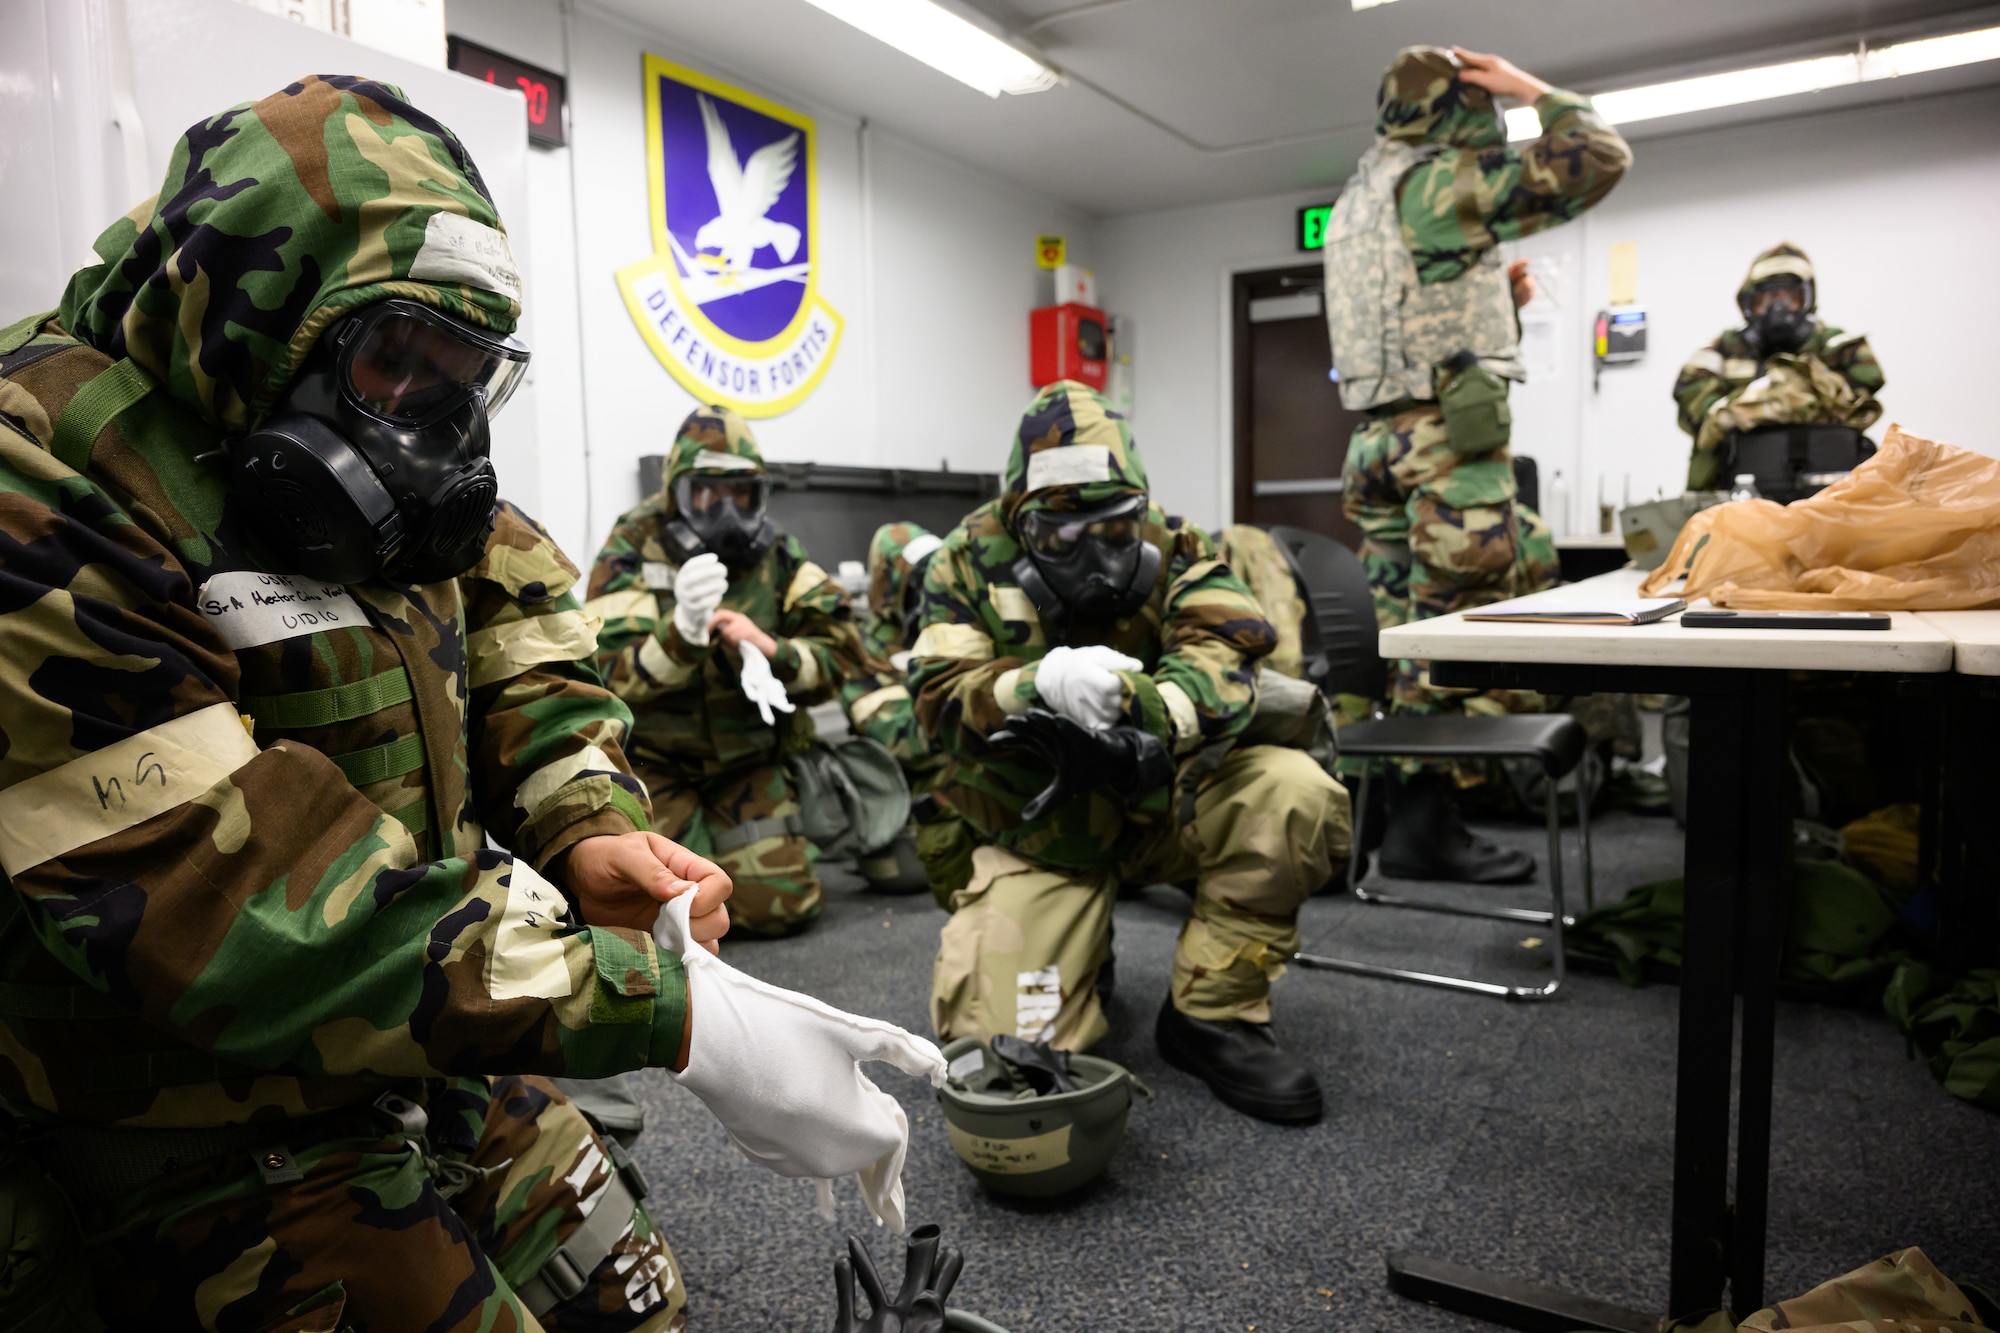 Airmen don protective gear during a Phase 2 exercise at Hill Air Force Base, Utah, Sept. 14, 2022.